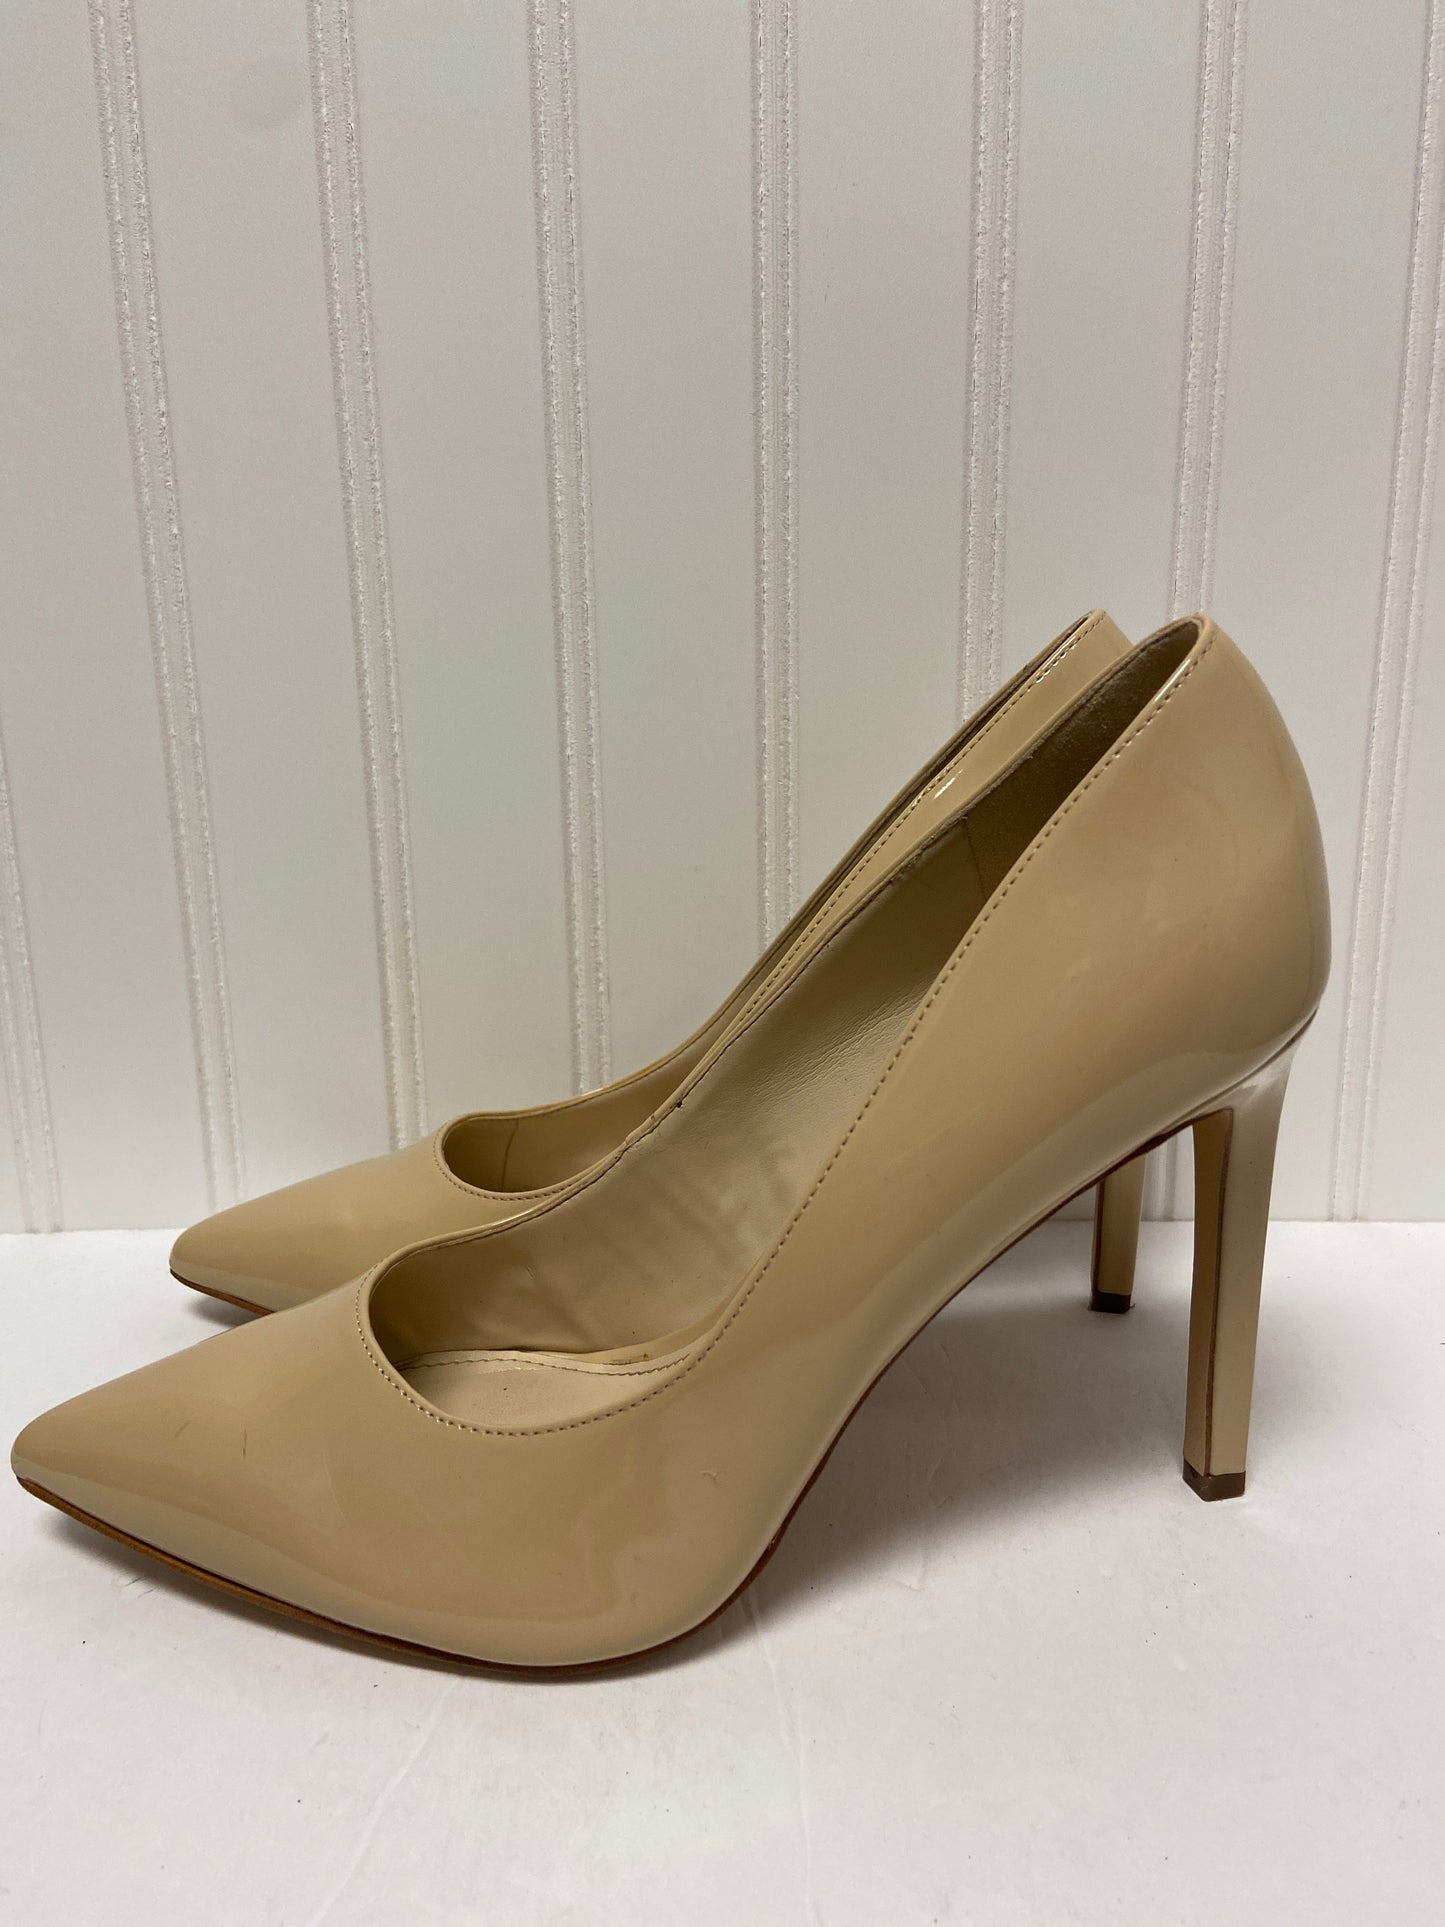 Shoes Heels Stiletto By Nine West  Size: 8.5